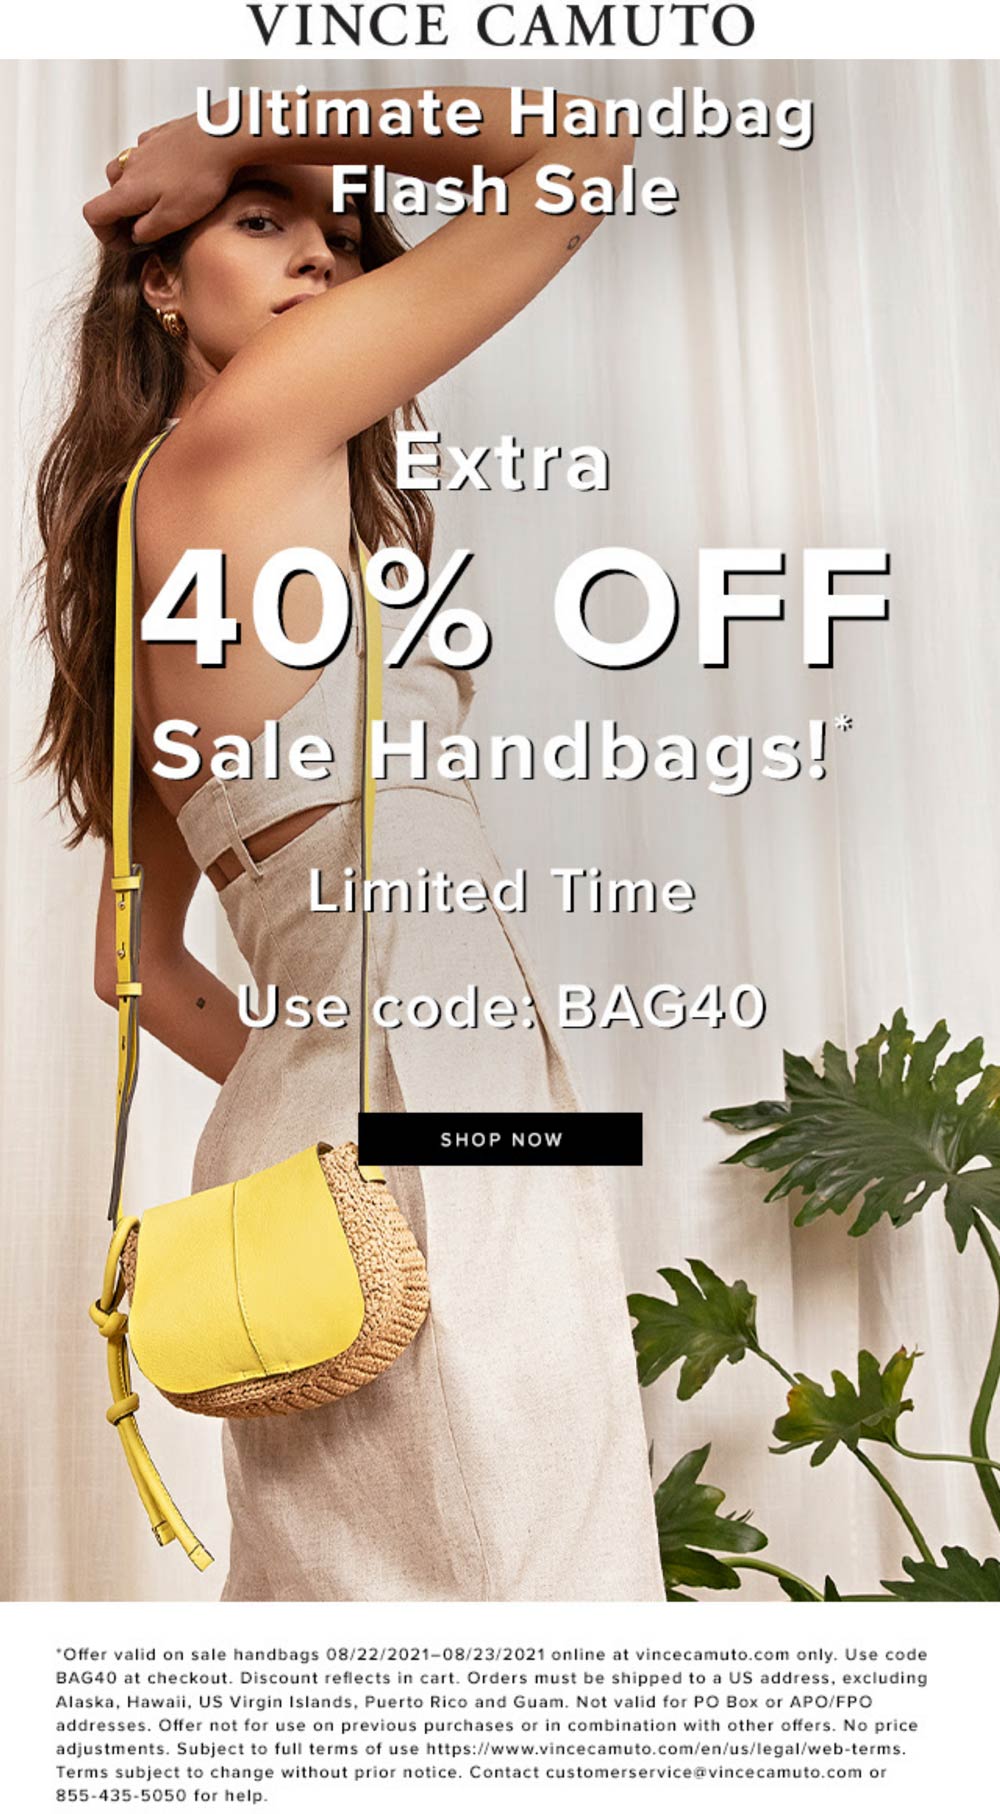 Vince Camuto stores Coupon  Extra 40% off sale handbags today at Vince Camuto via promo code BAG40 #vincecamuto 